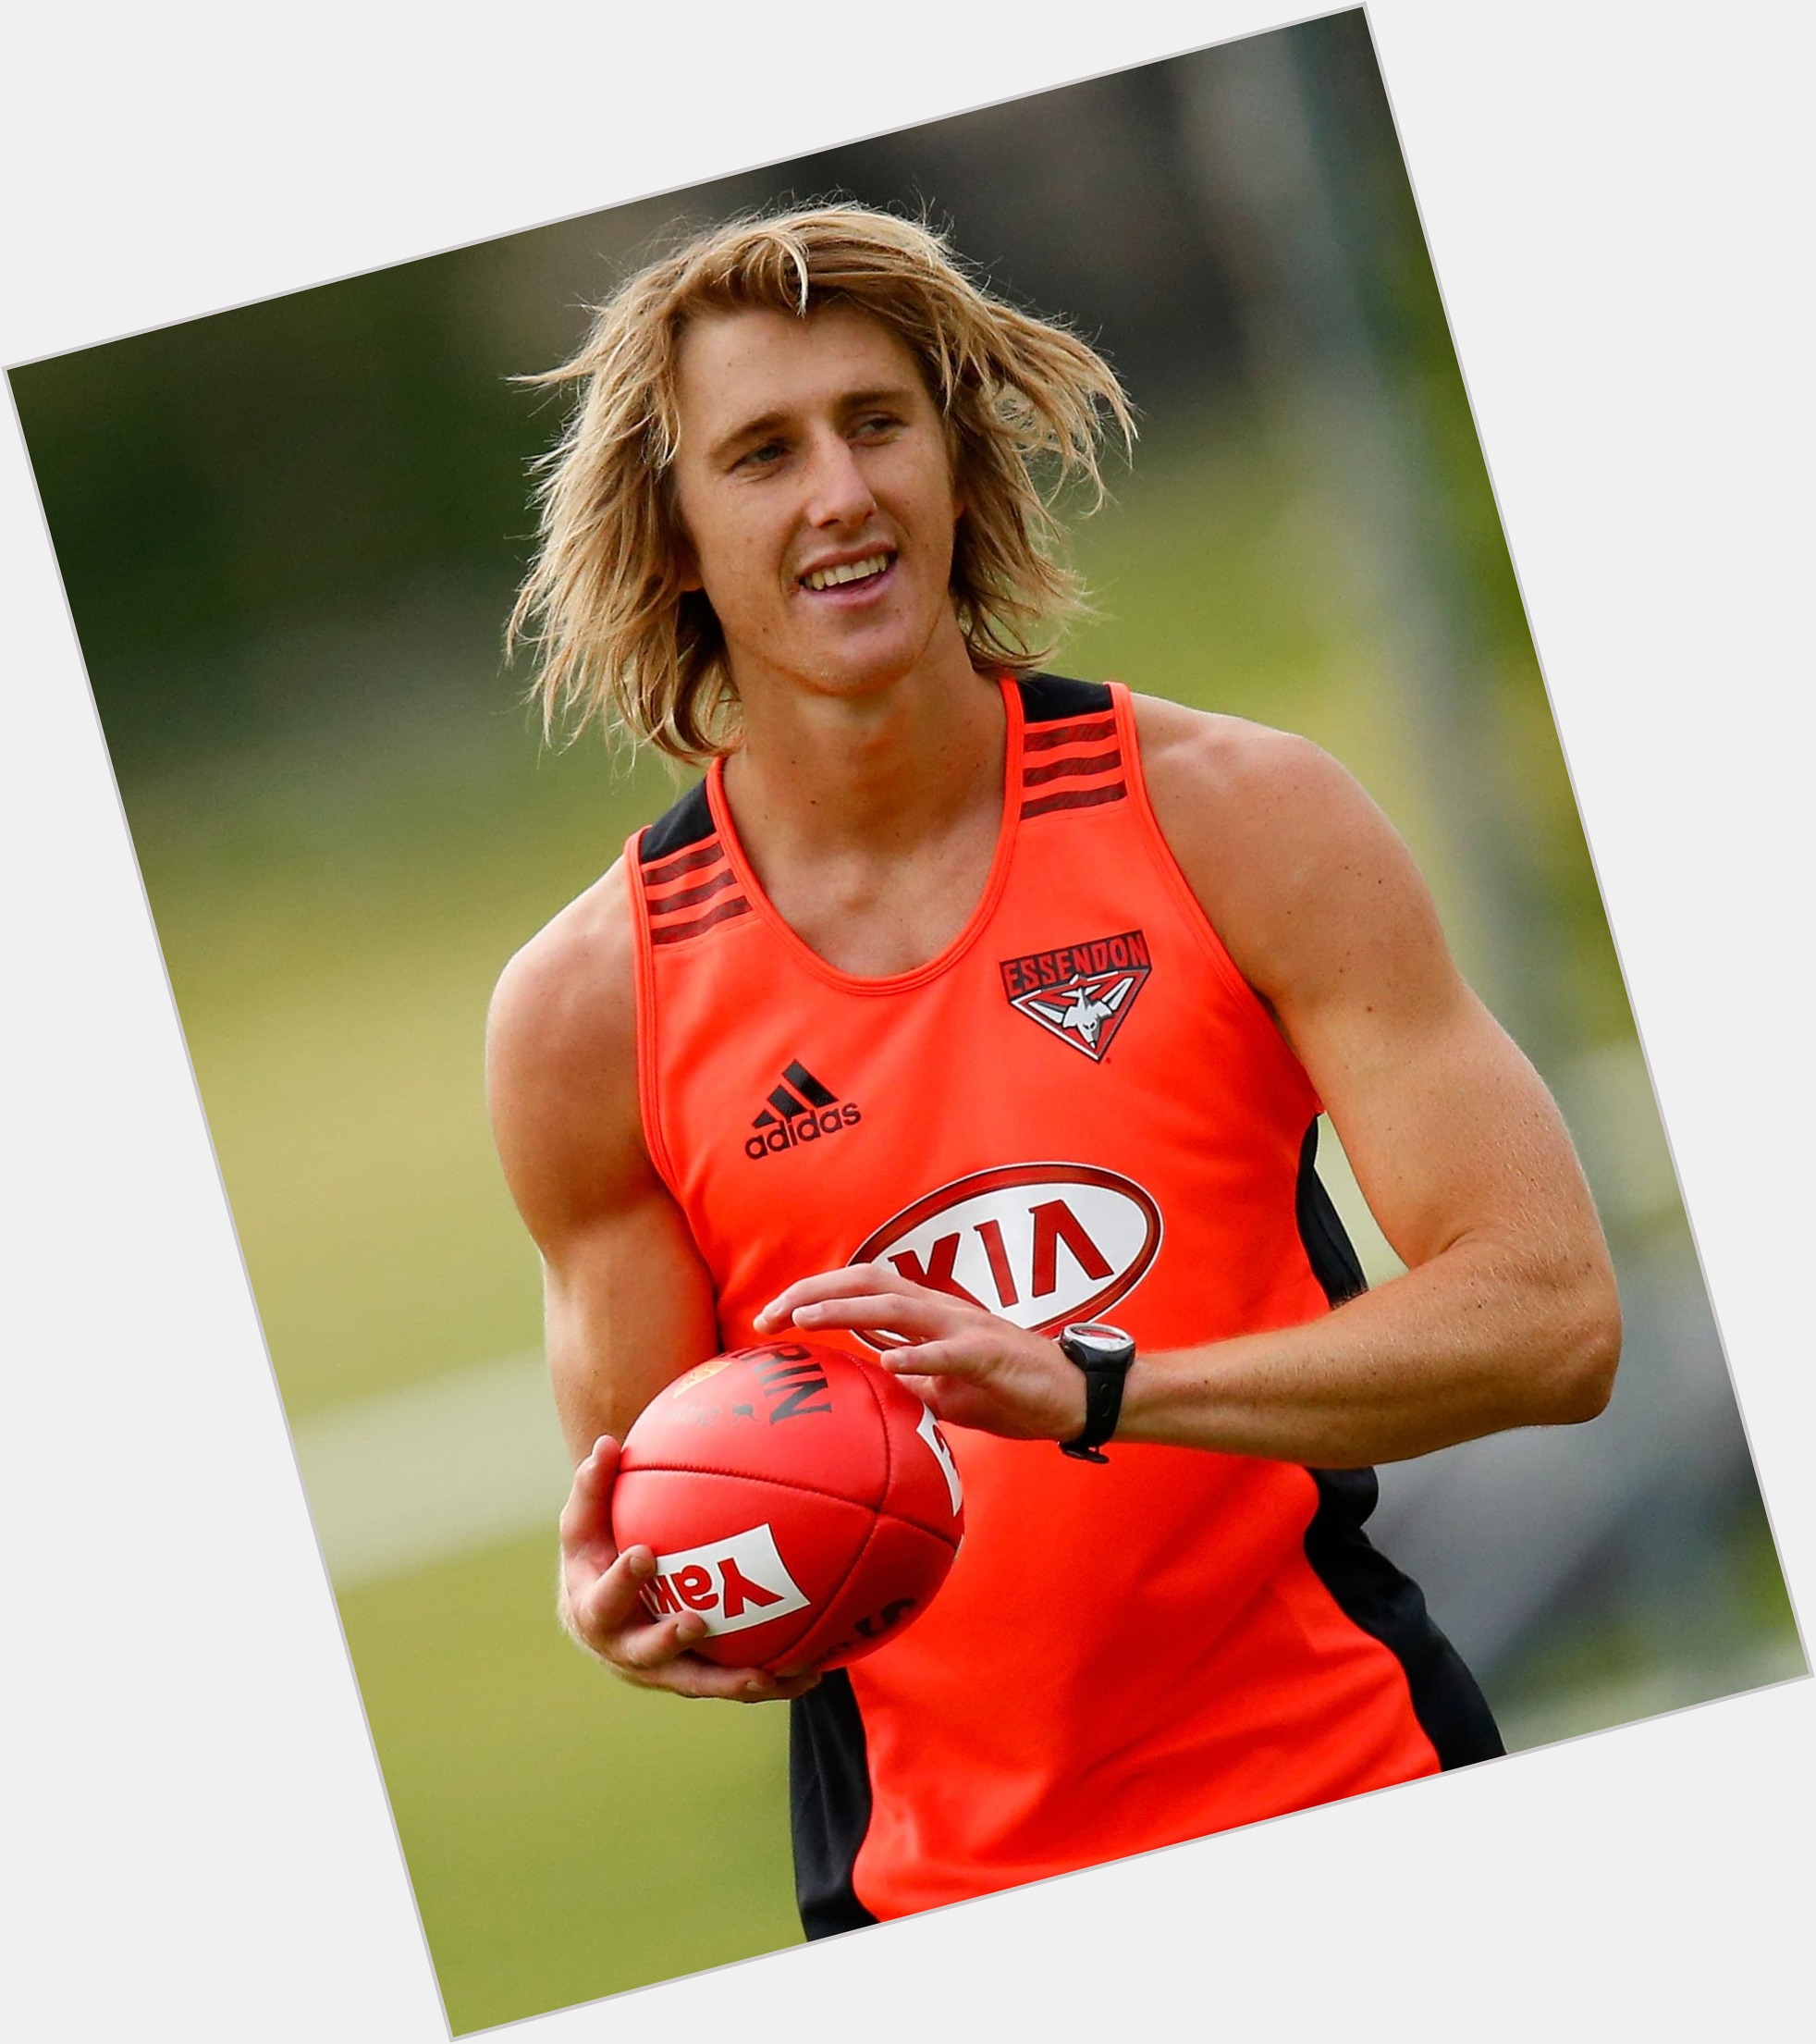 Dyson Heppell dating 2